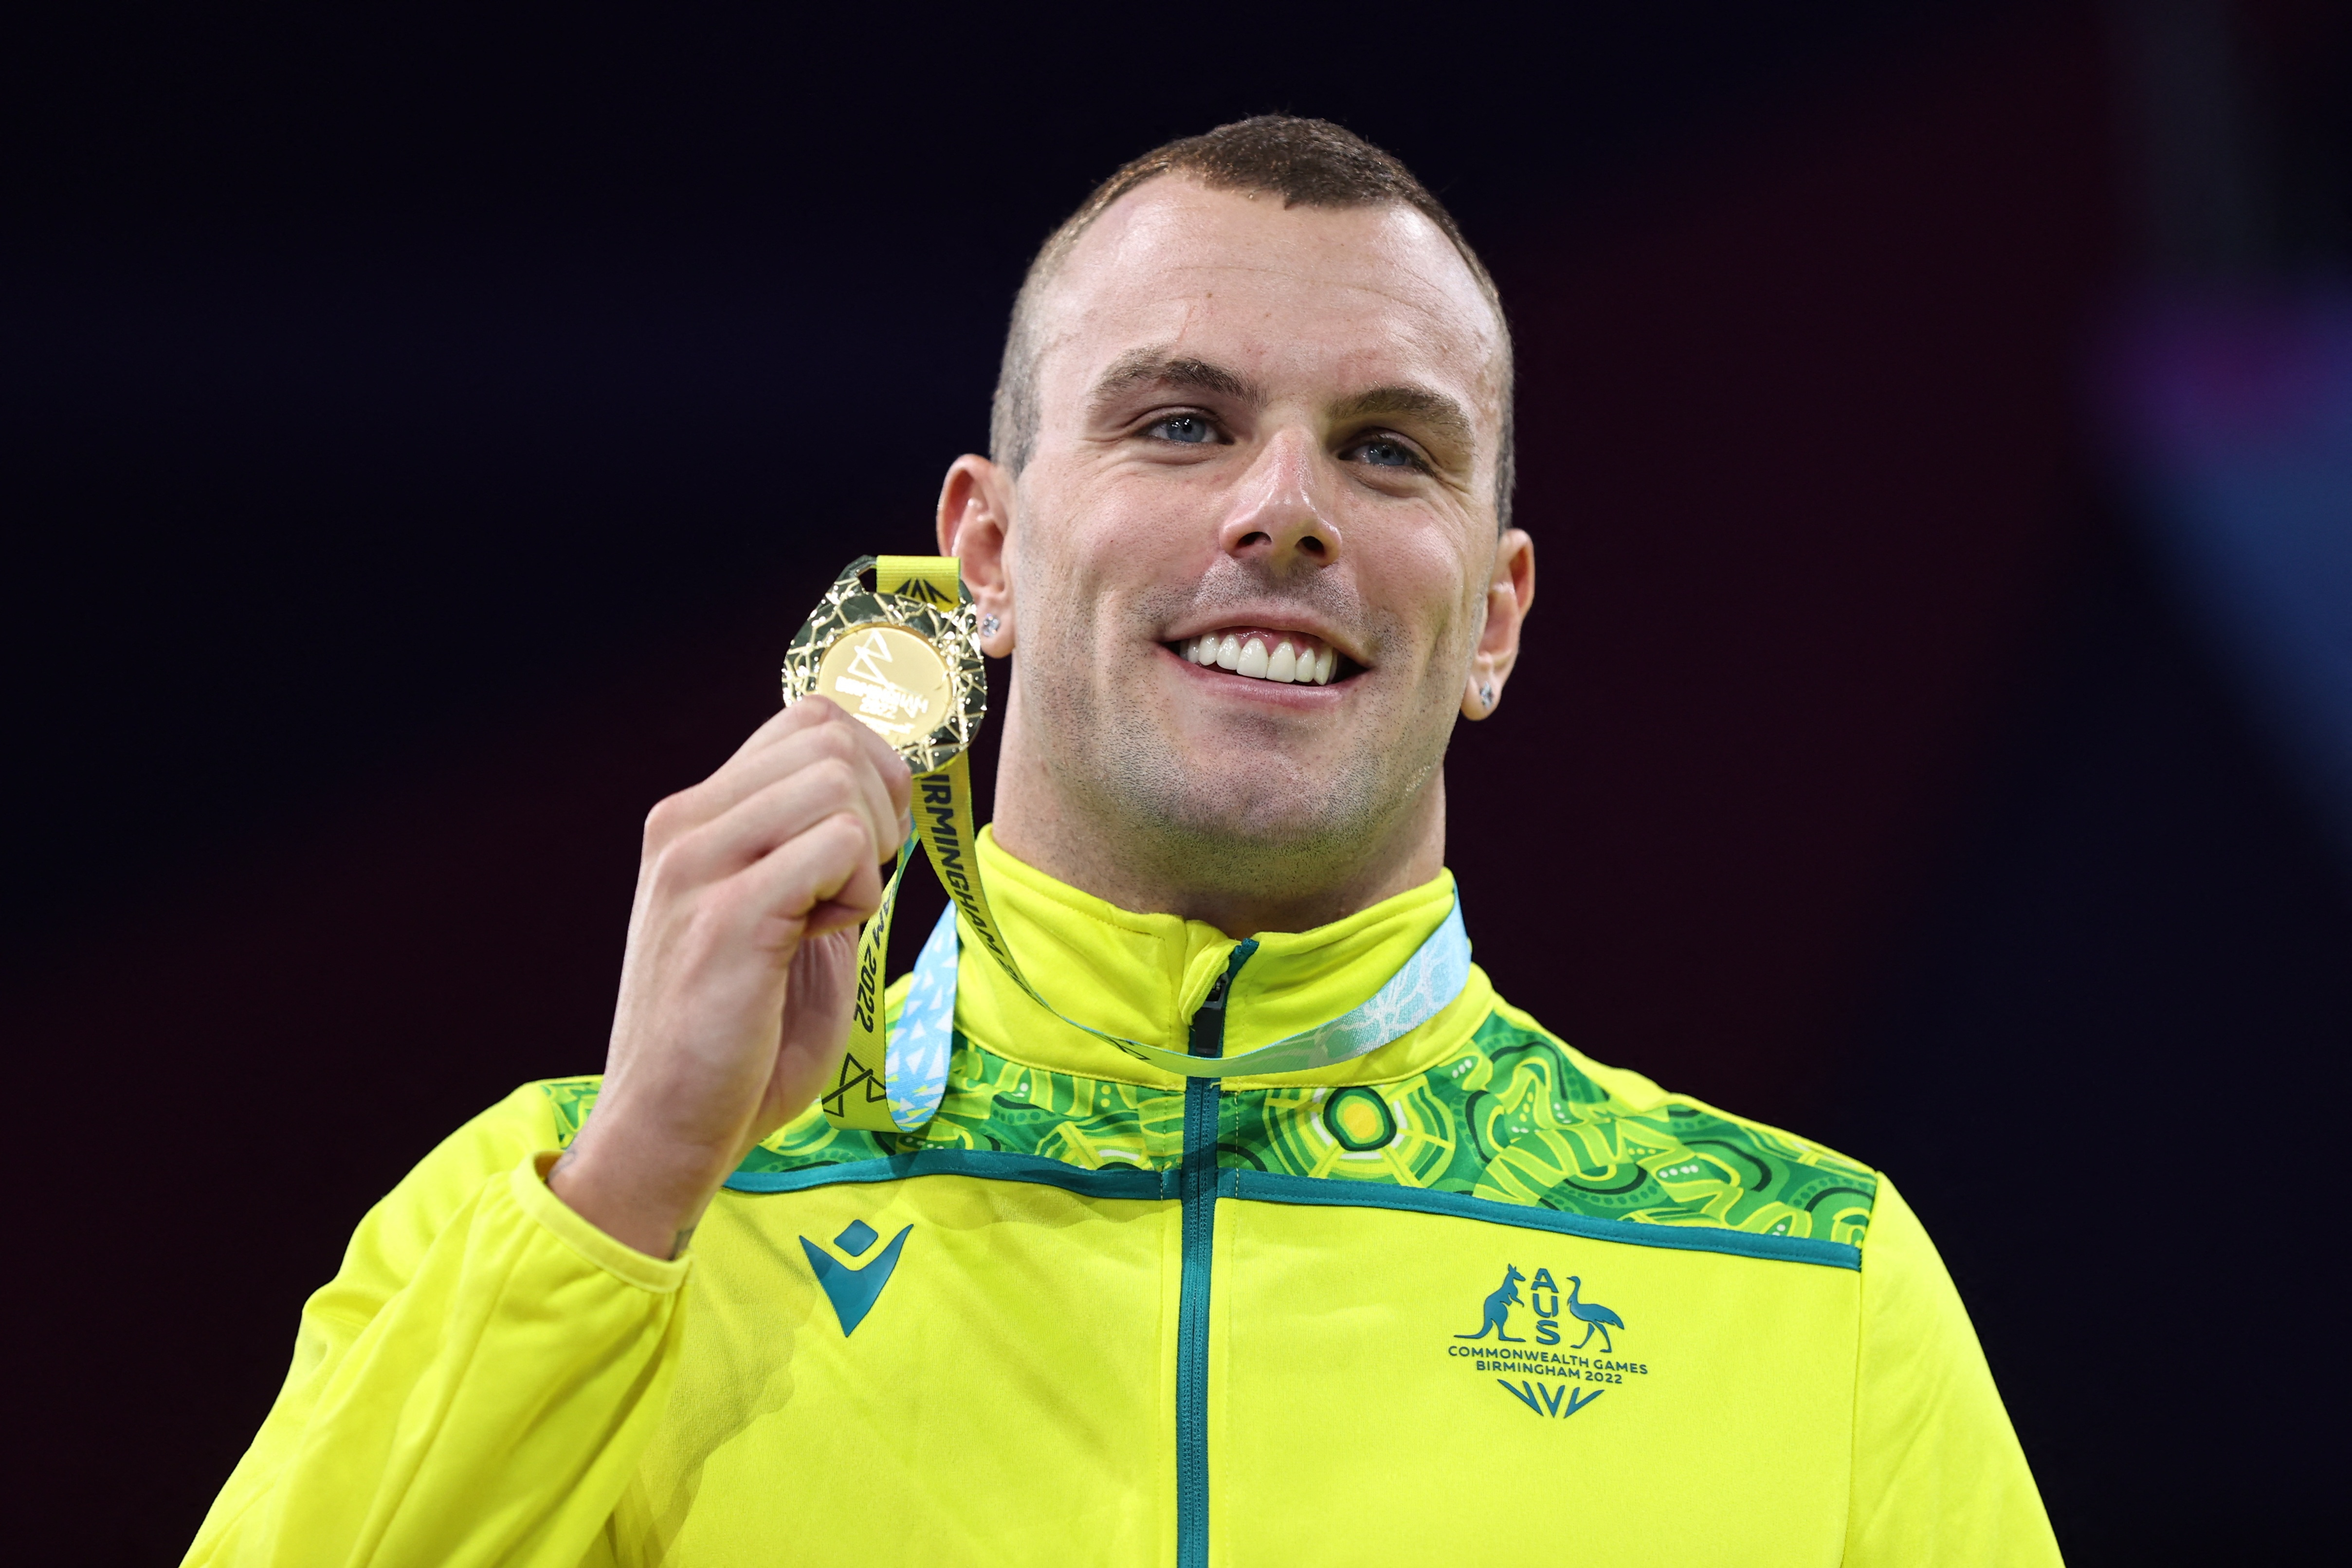 Commonwealth Games - Swimming - Men's 100m Freestyle - Final- Medal Ceremony - Sandwell Aquatics Centre, Birmingham, Britain - August 1, 2022 Gold Medallist Australia's Kyle Chalmers celebrates on the podium during the medal ceremony REUTERS/Stoyan Nenov